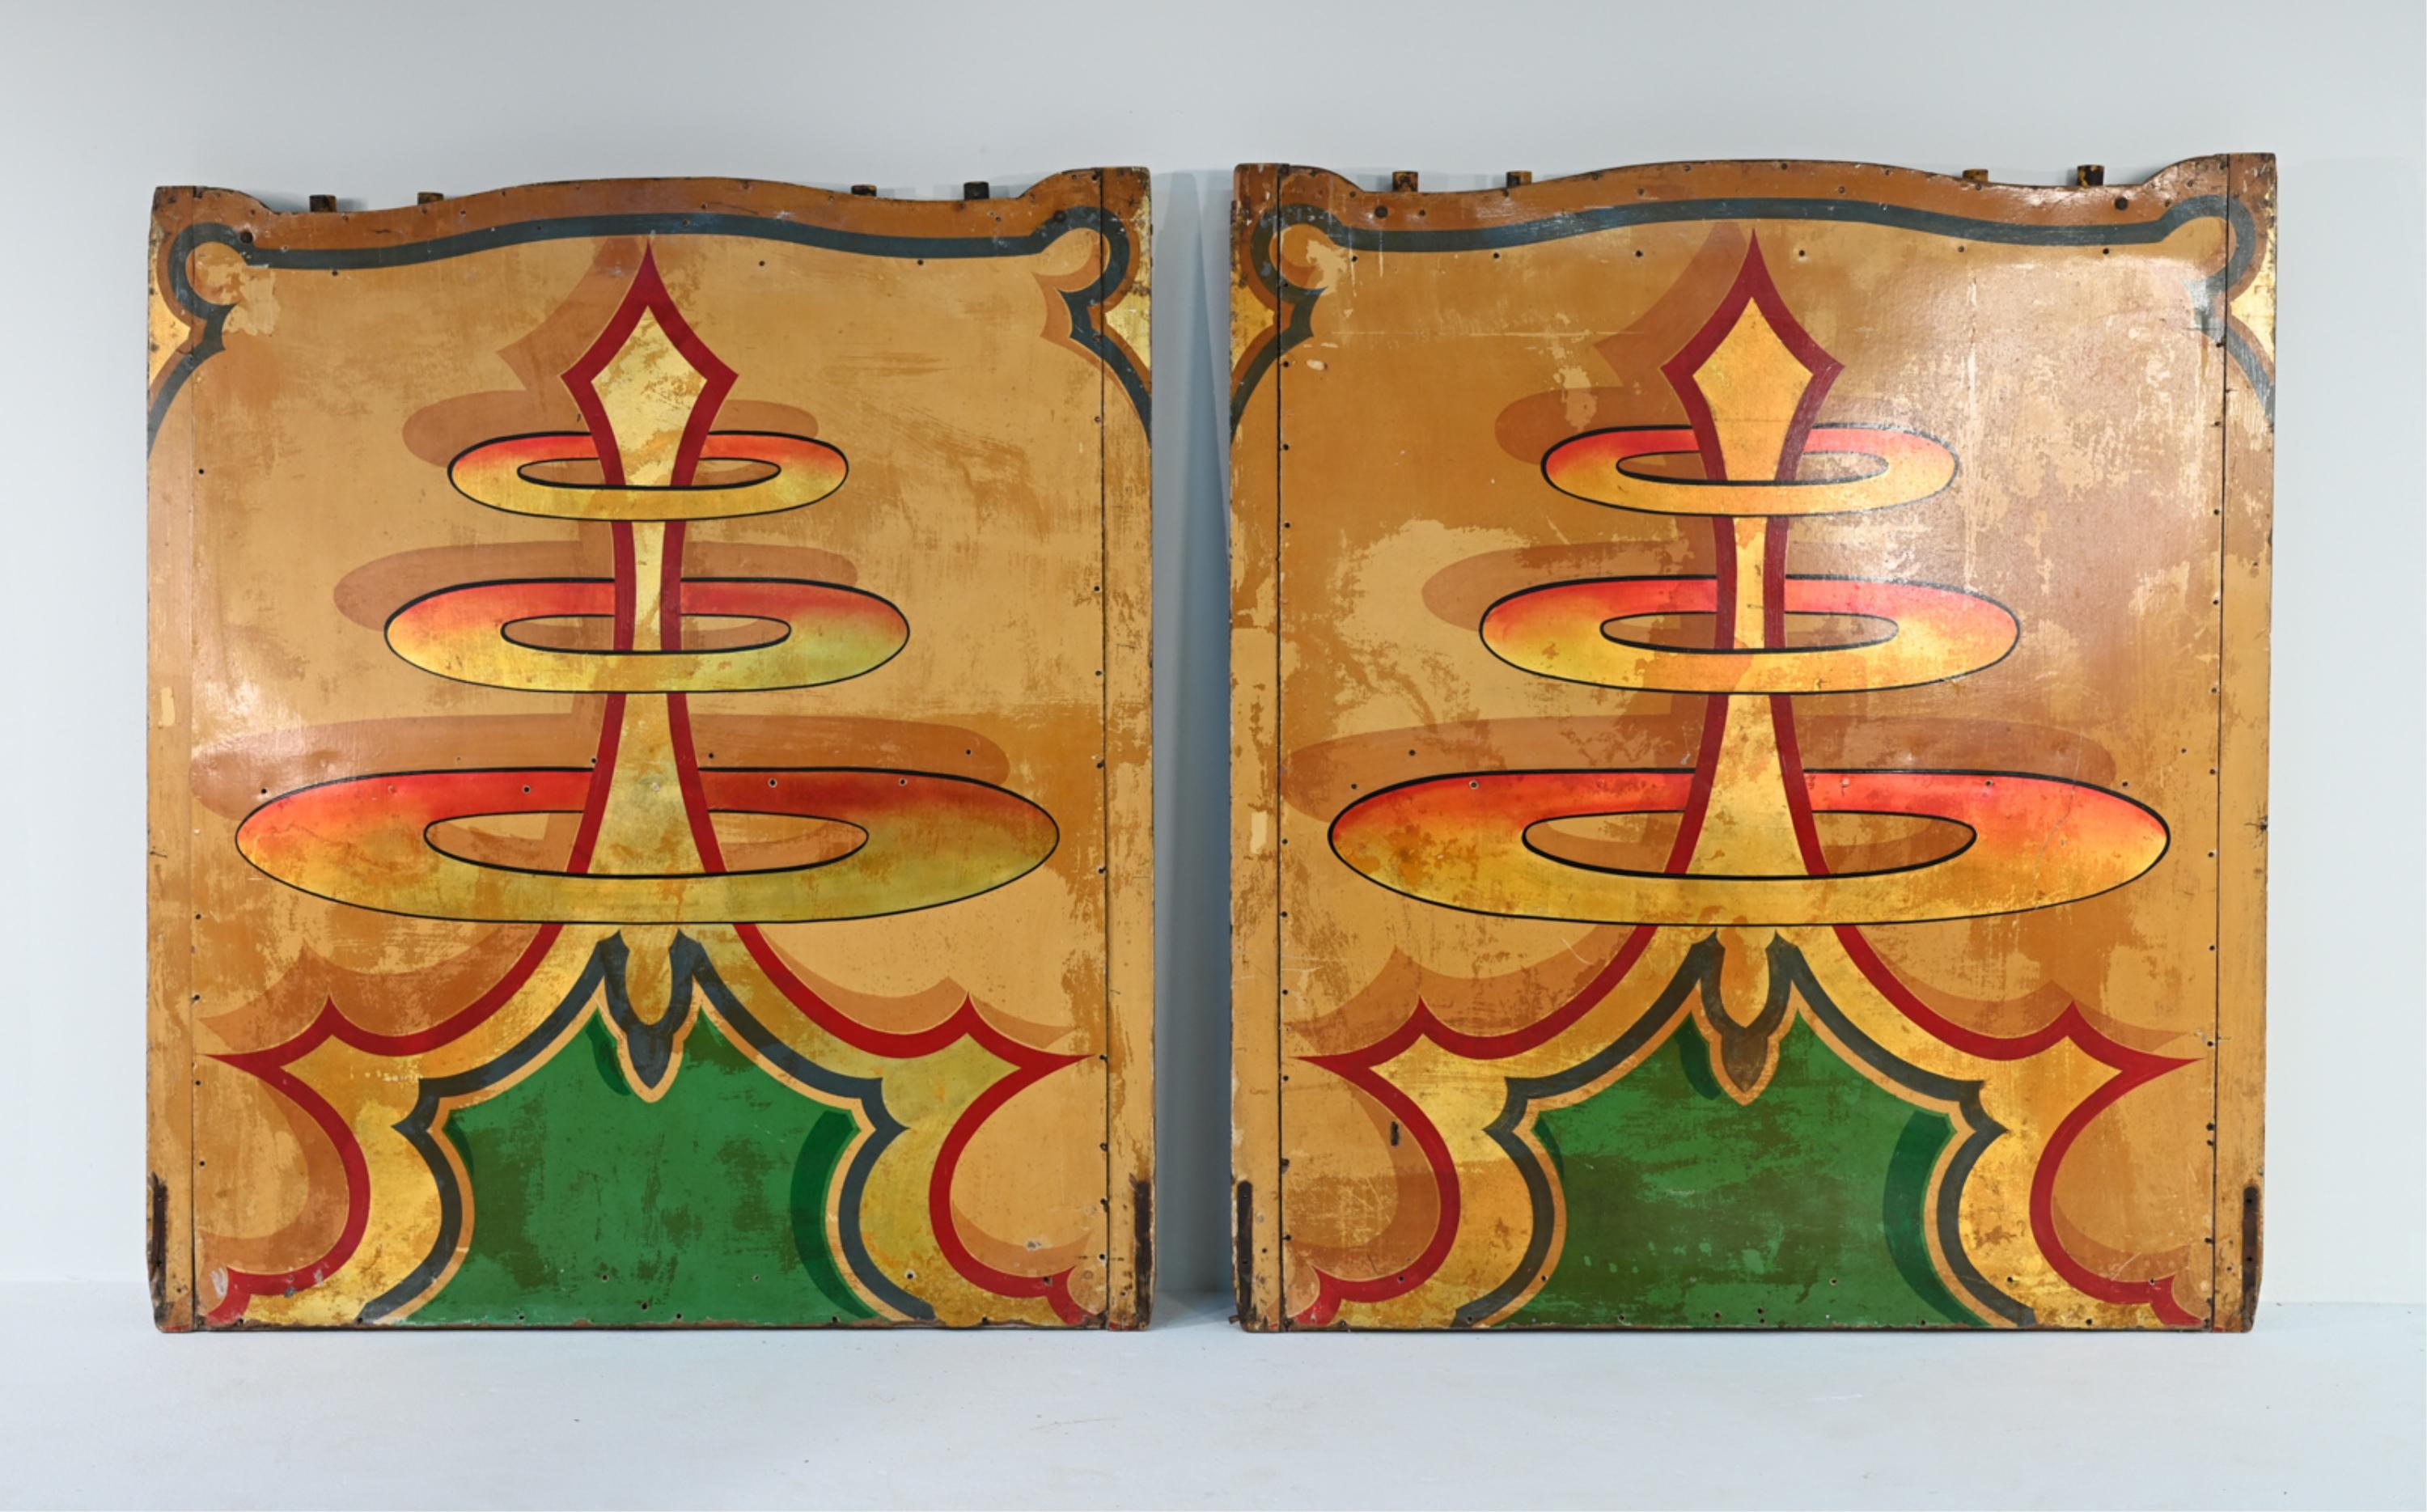 Bring an unusual piece of folk history into your home with this stunning pair of early 20th century rounding boards salvaged from a carnival. With hand painted designs and gold leaf pigment, these boards are a whimsical, decorative architectural